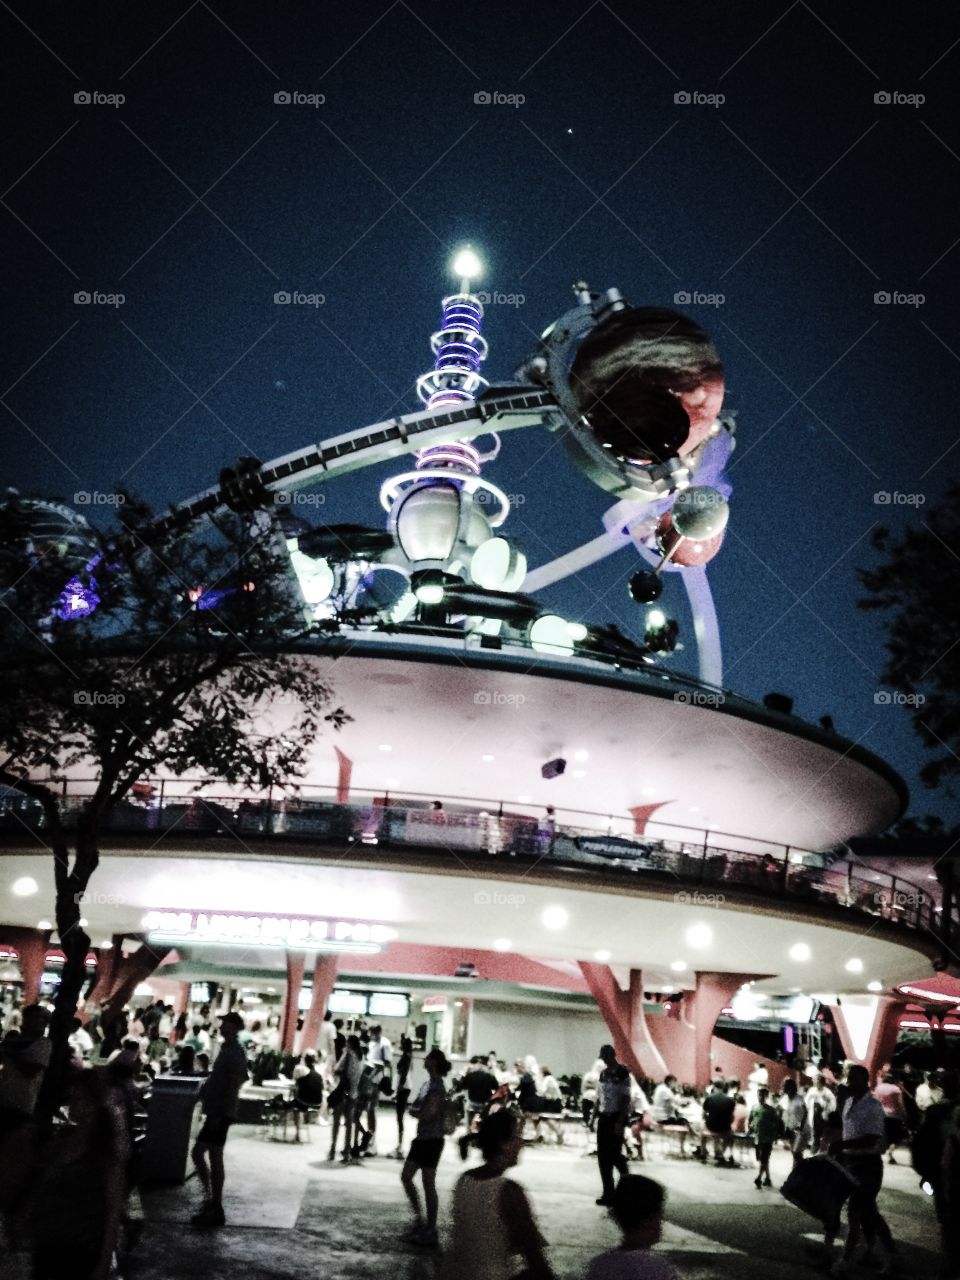 Tomorrowland is here today. Check it out at the Magic Kingdom, Walt Disney World, Orlando , Florida. 